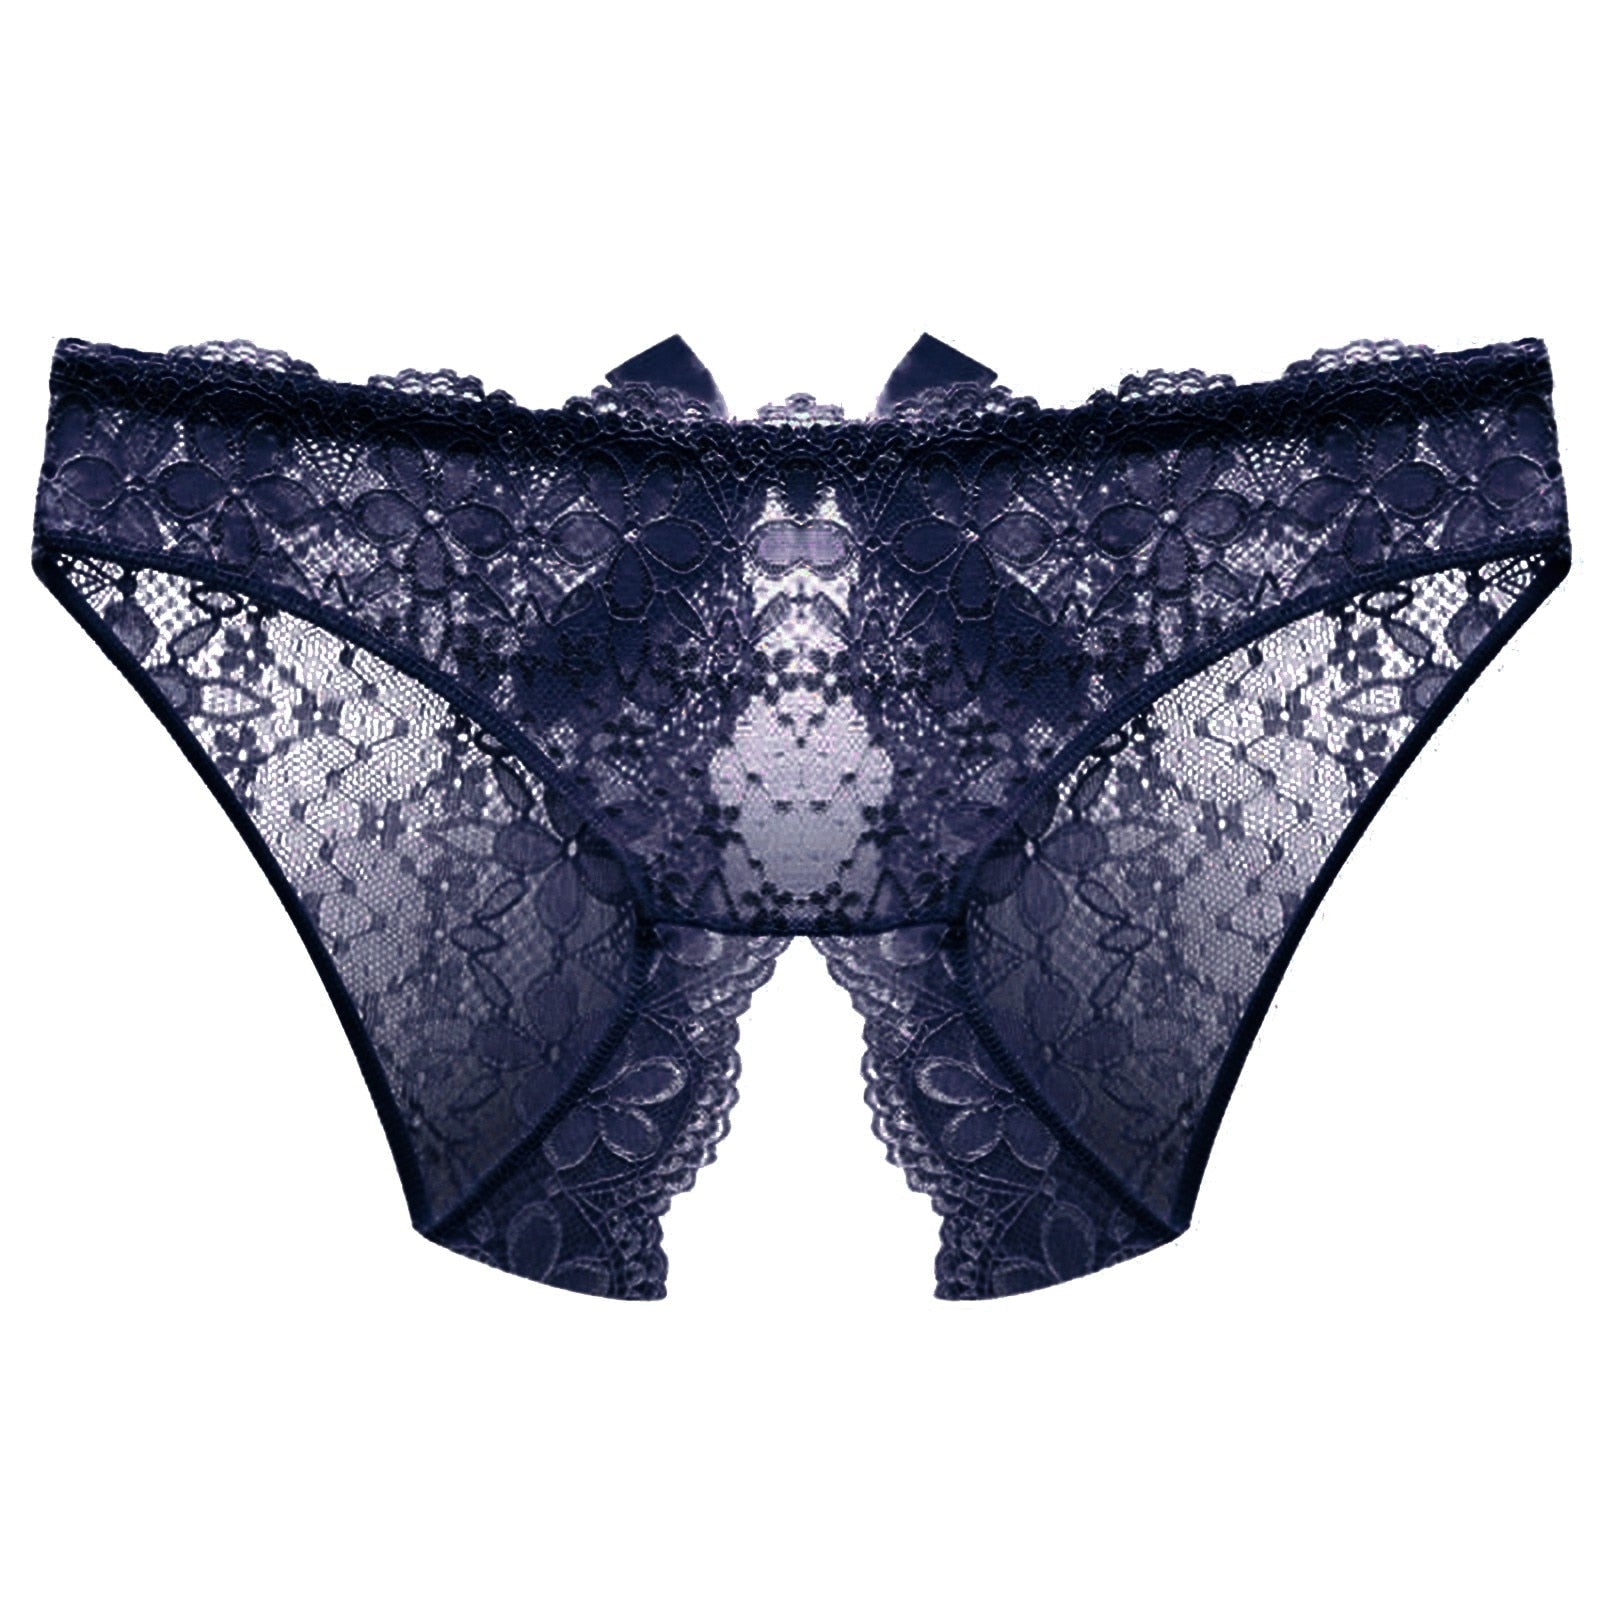 Open Crotch Underwear Panties With Bow AMAIO